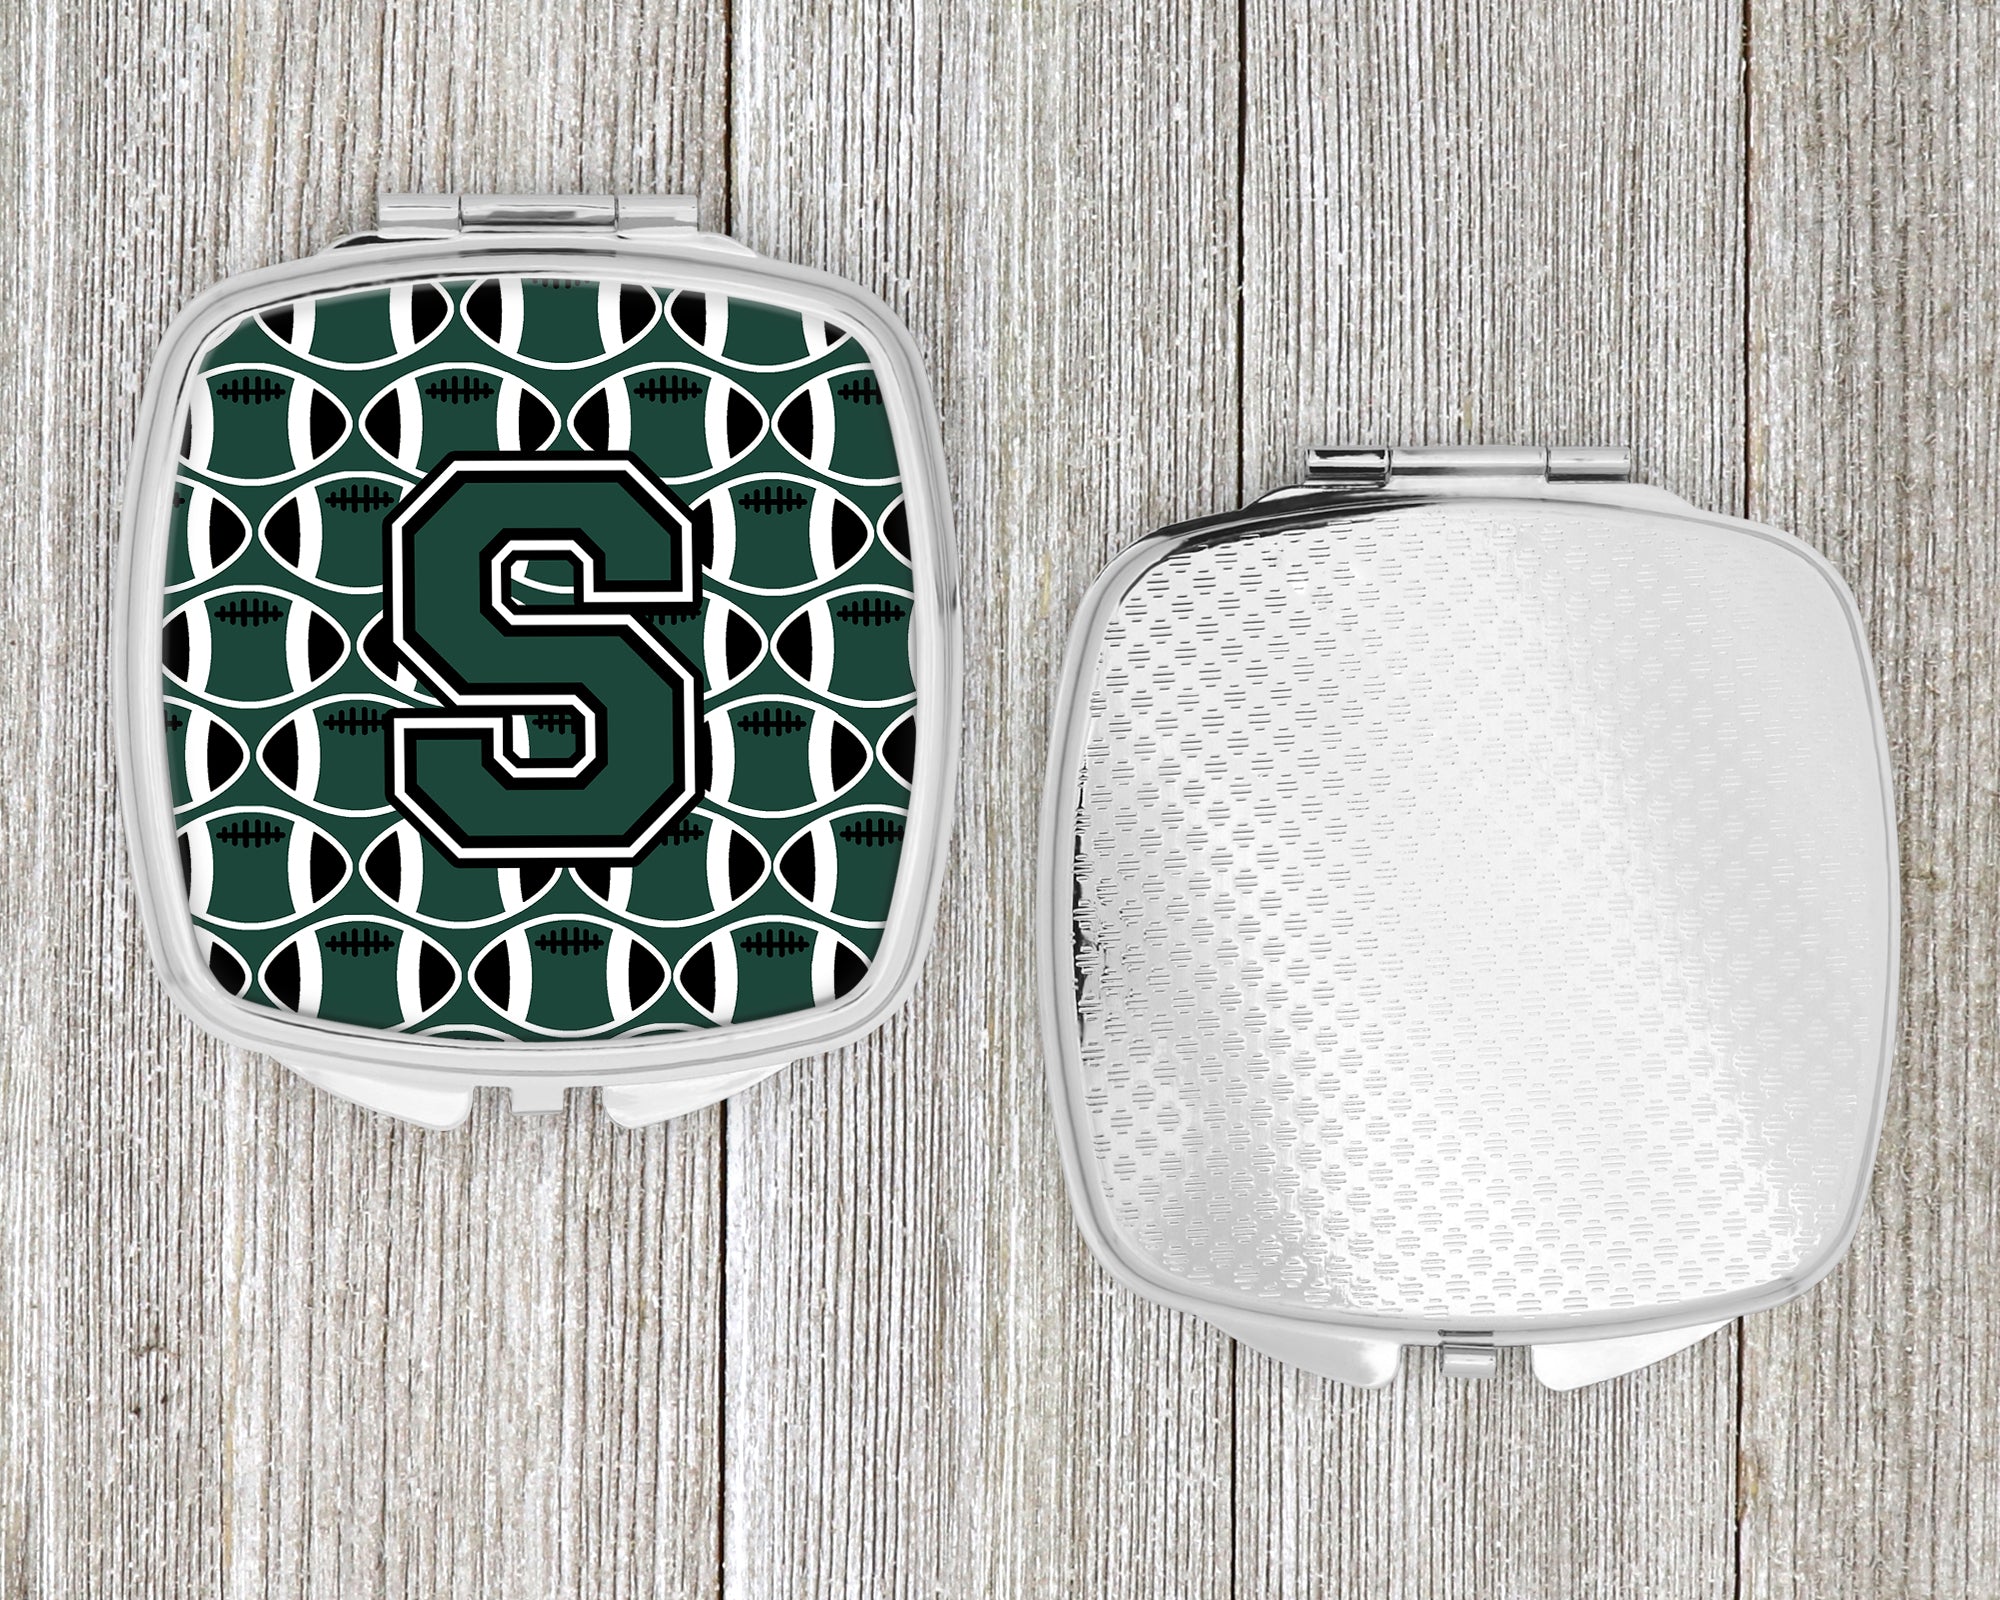 Letter S Football Green and White Compact Mirror CJ1071-SSCM